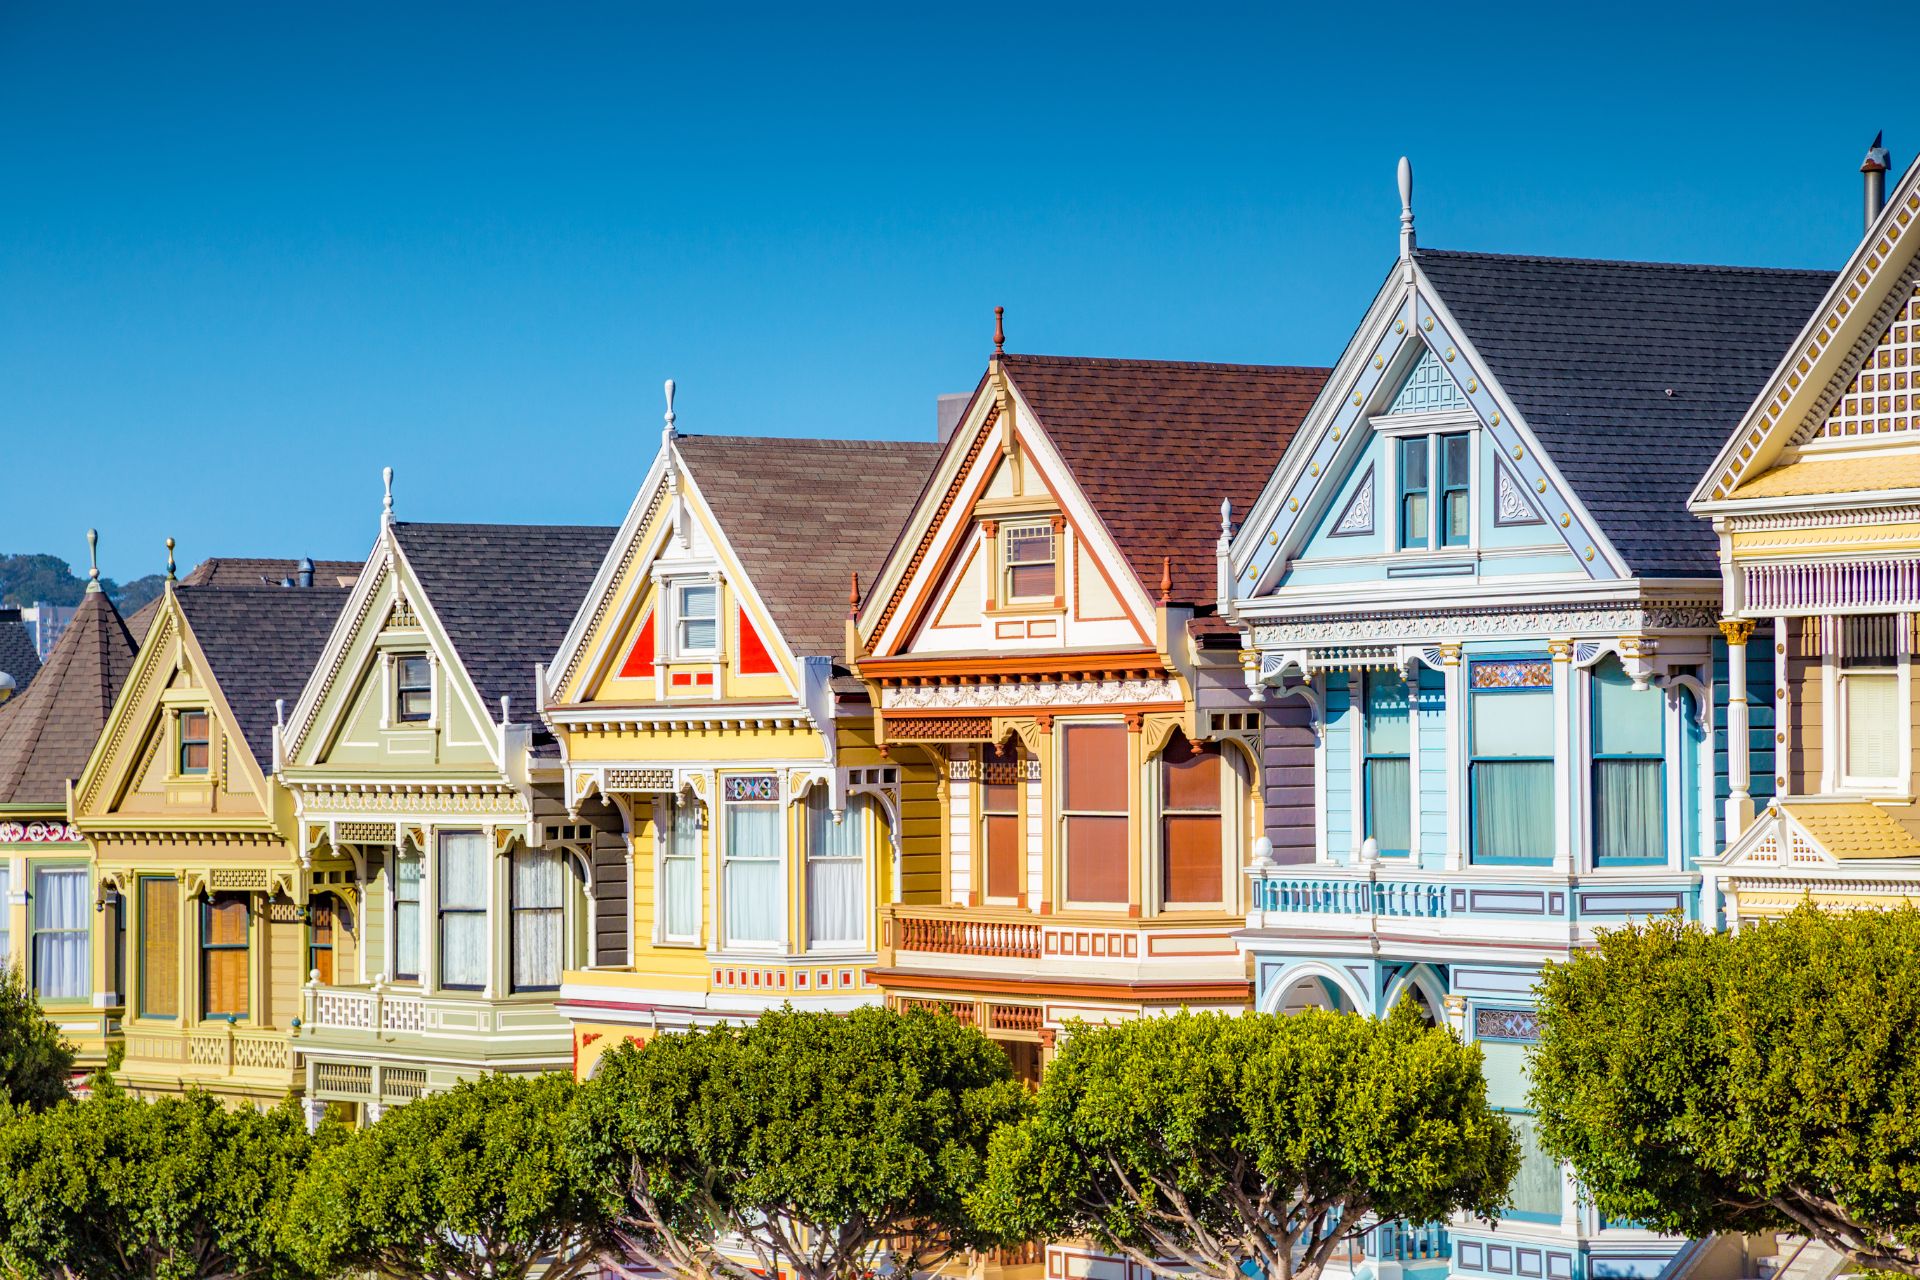 California has taken aggressive steps to address this issue, notably by relaxing zoning laws to facilitate construction. However, the focus on multi-unit housing over single-family homes has led to a mismatch between supply and demand.